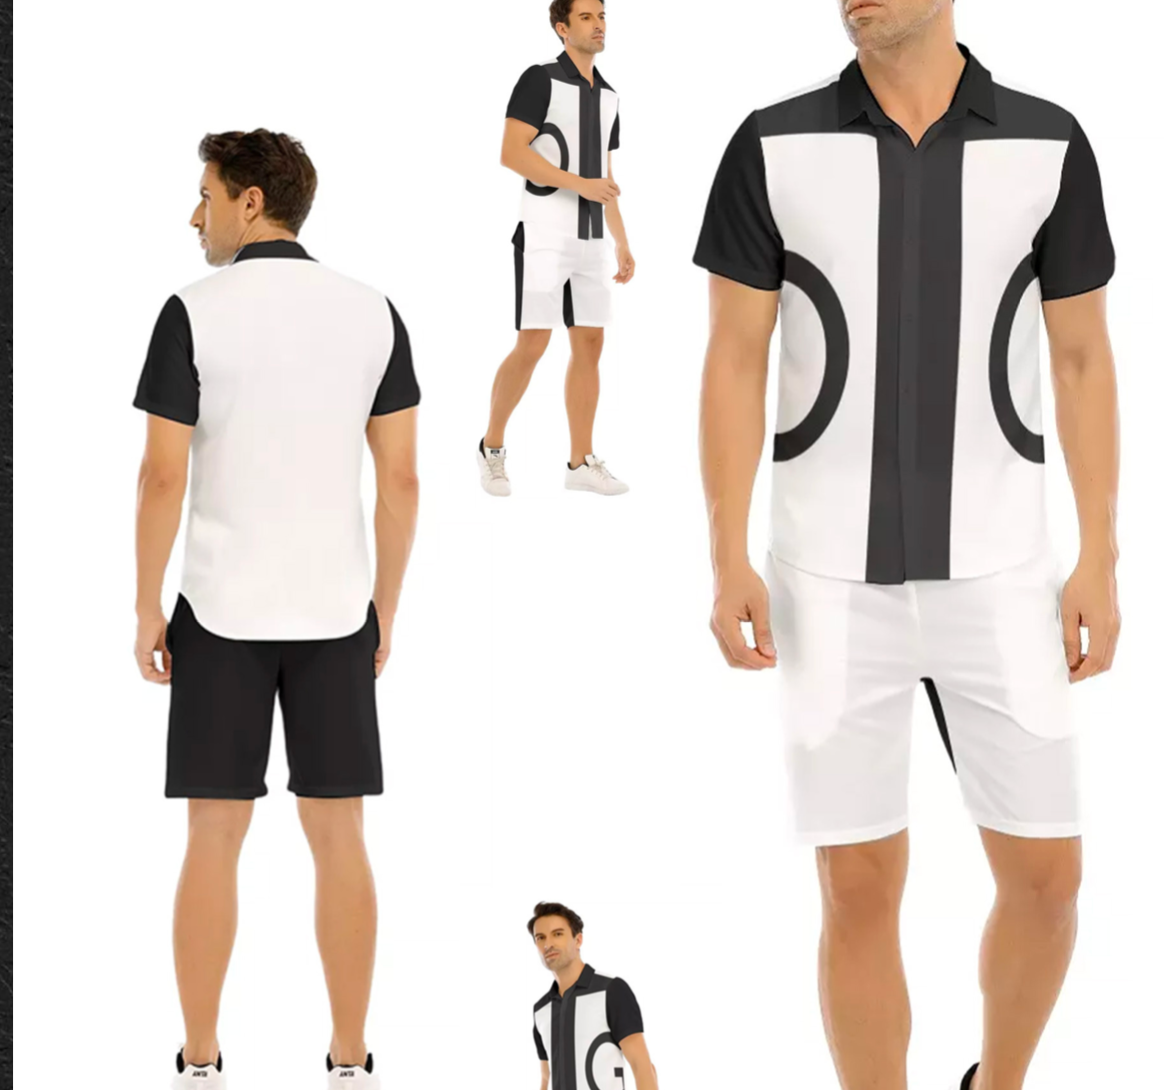 Mens Outfit Set - The best Shorts sets - matching sets - fashion label company - 2 piece - outfit sets - pants - linen - trousers and more